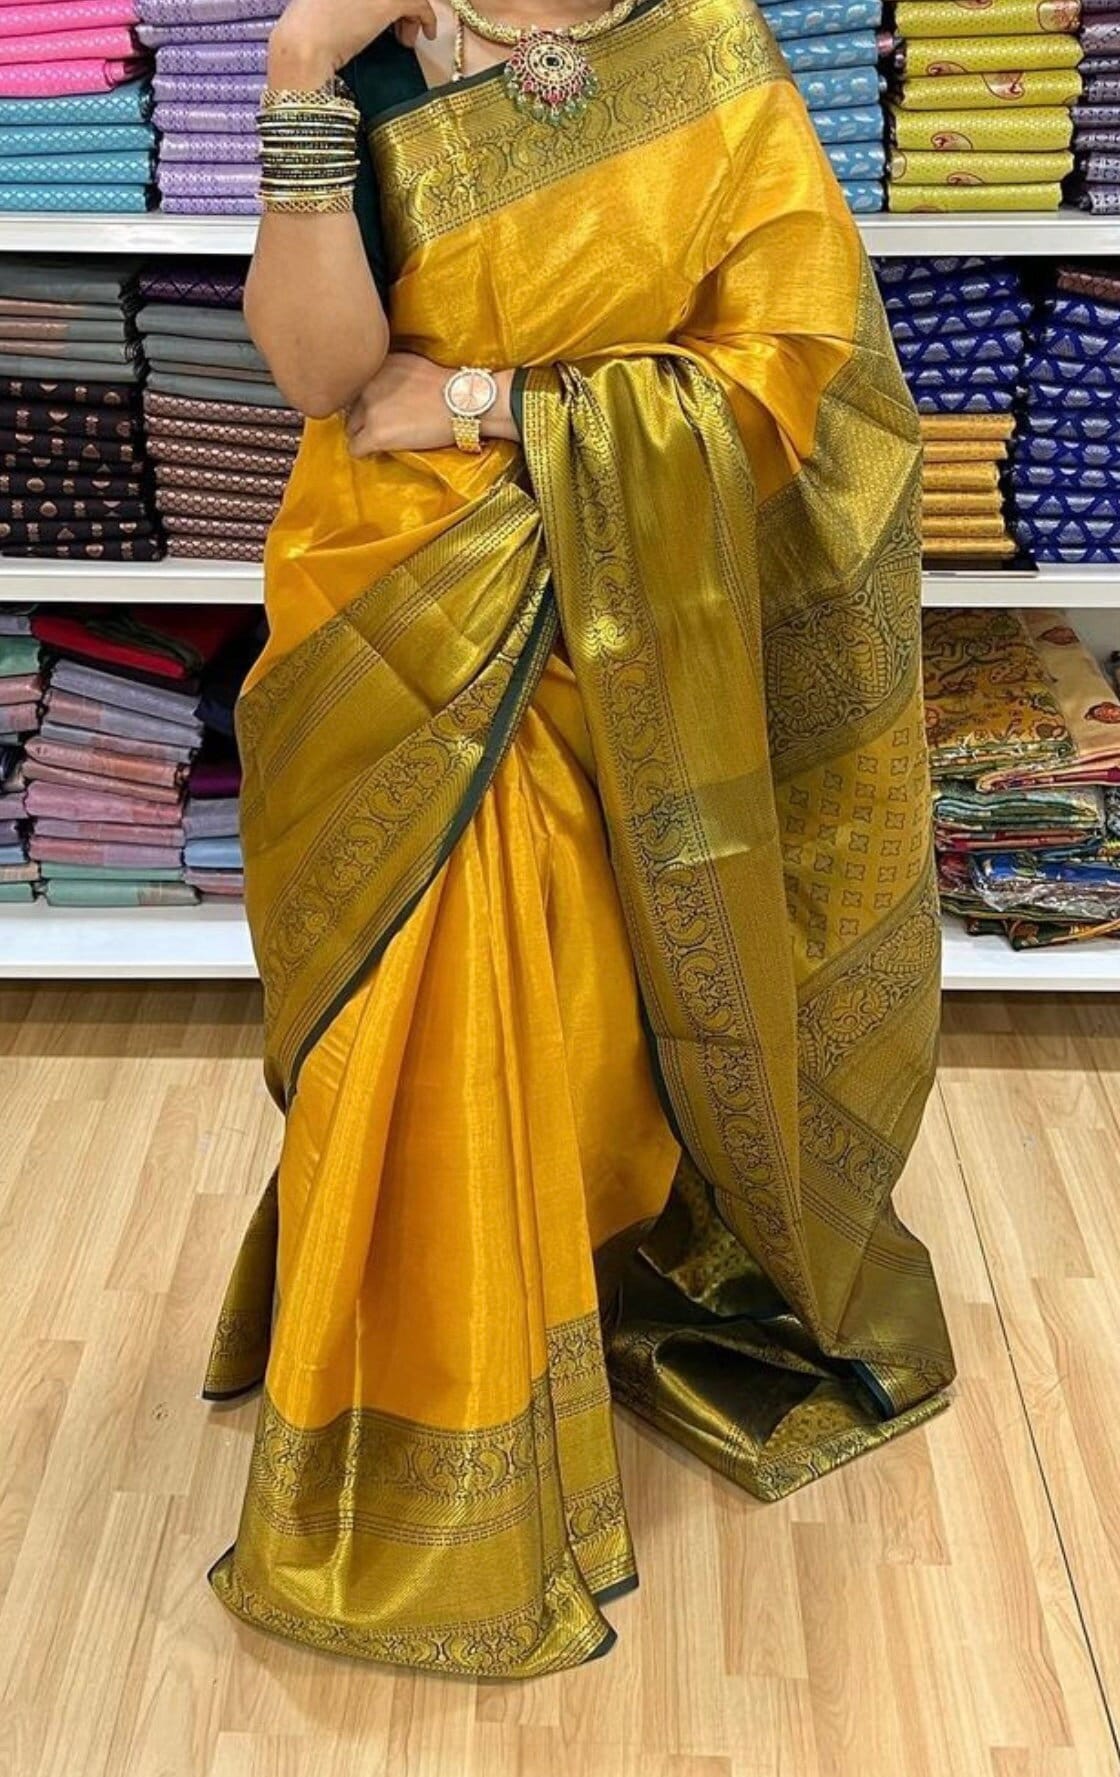 Shop Affordable Sarees Online From These Brands